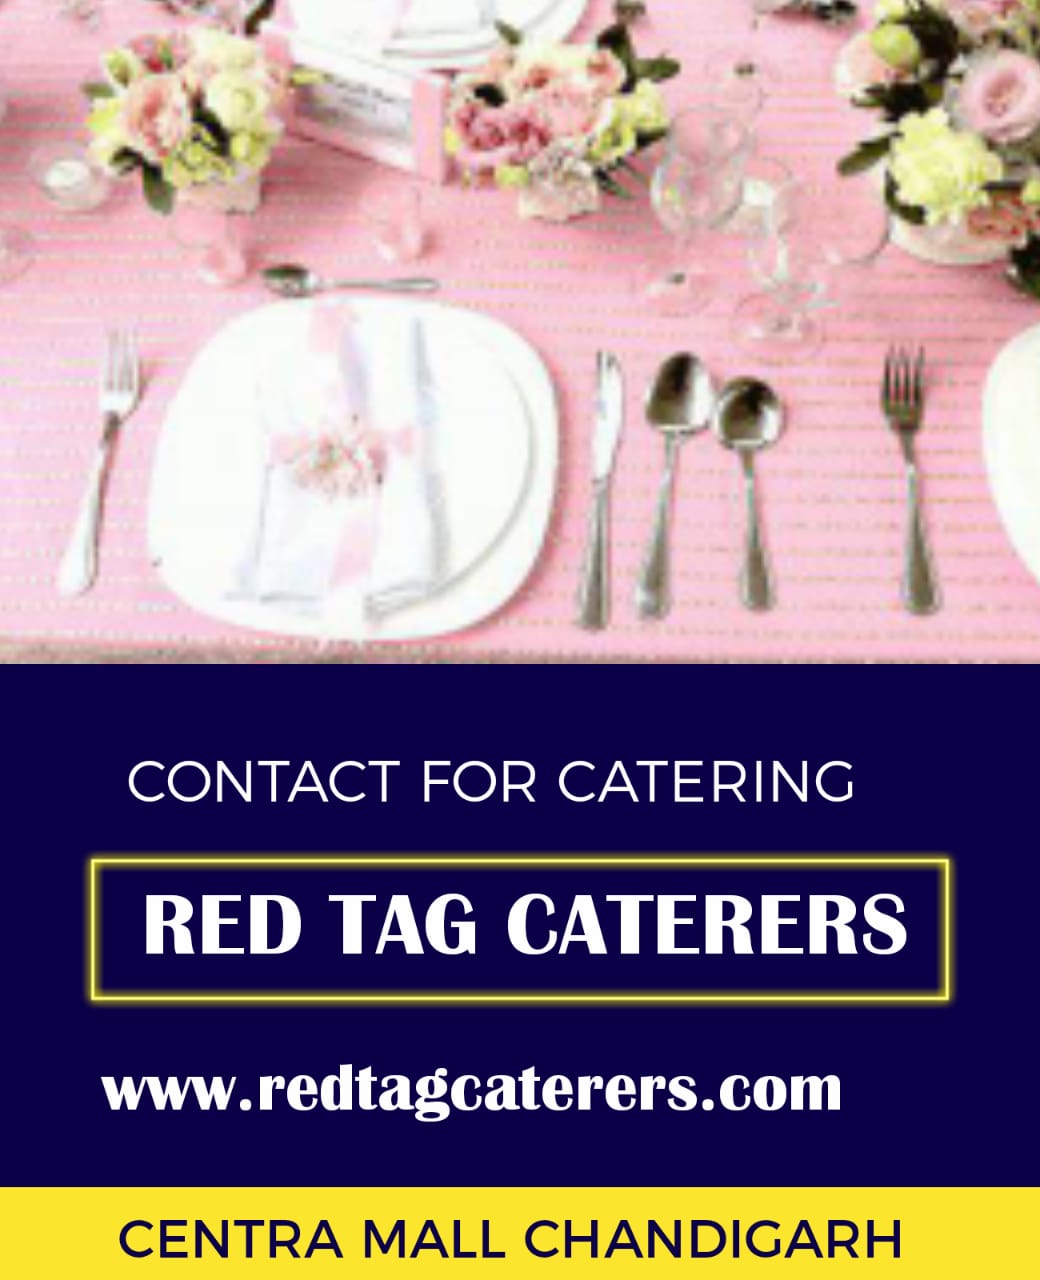 Best all kinds of occasions & best food culinary cuisines by RED TAG caterers zirakpur Mohali punjab.. | Red Tag Caterers | Best occasion catering services in zirakpur Mohali punjab, best food quality catering services in zirakpur Mohali punjab, best culinary cuisines catering services in zirakpur Mohali punjab, best exper - GL46434